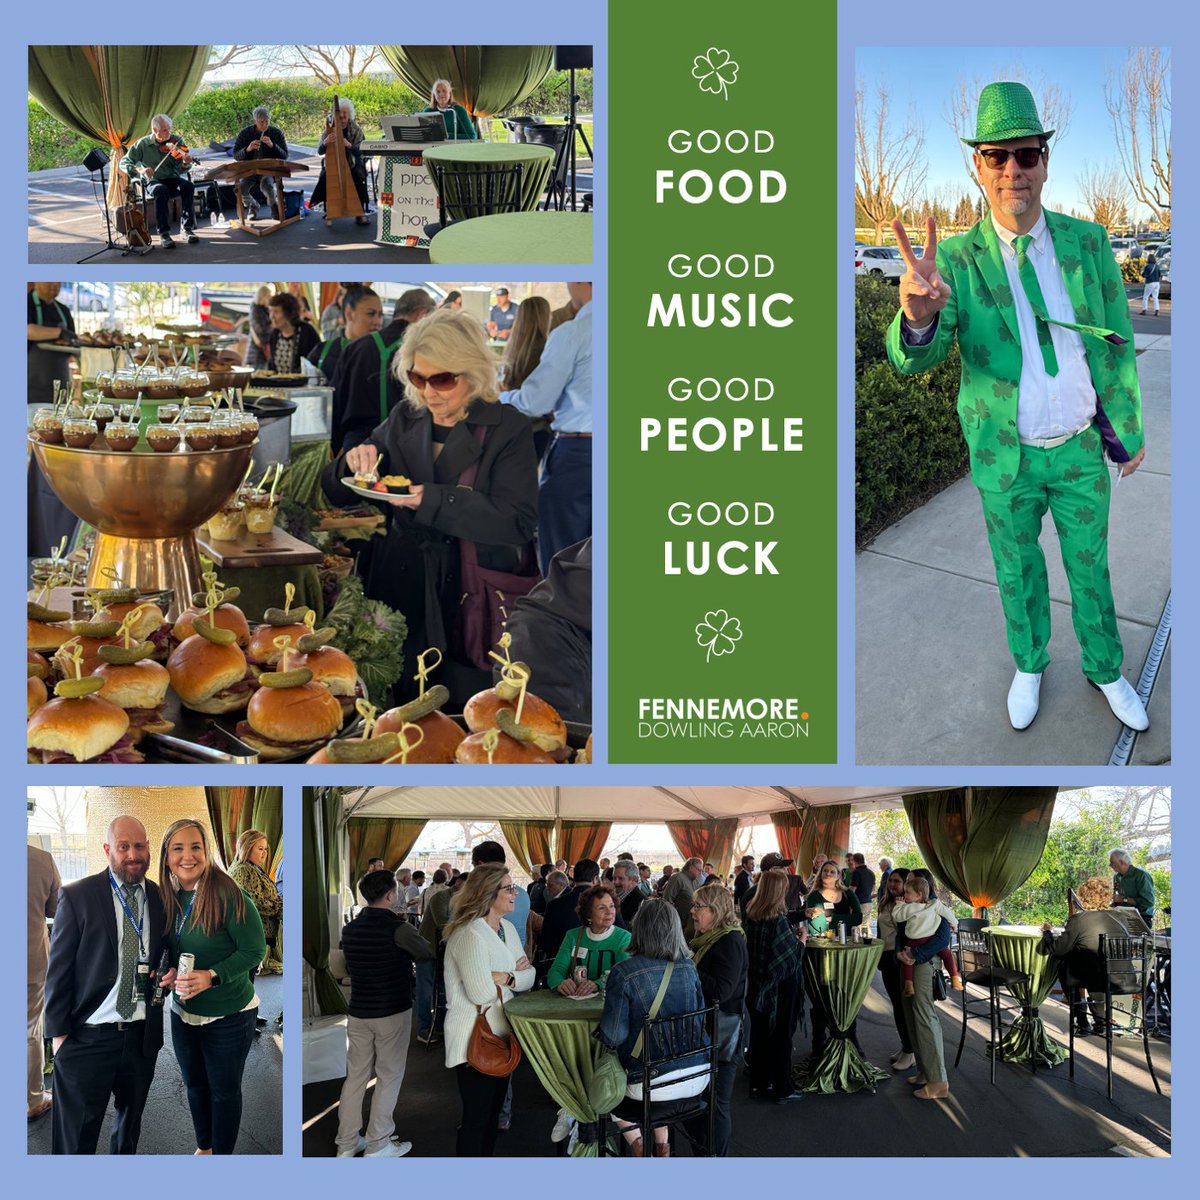 We celebrated with our annual St. Patrick's Day party hosted by Fennemore's Fresno office. The event started in the early 1990’s honoring Mike Dowling who was proudly Irish. 

#StPatricksDay #LuckOfTheIrish #Fennemore #Fresno #CentralCalifornia